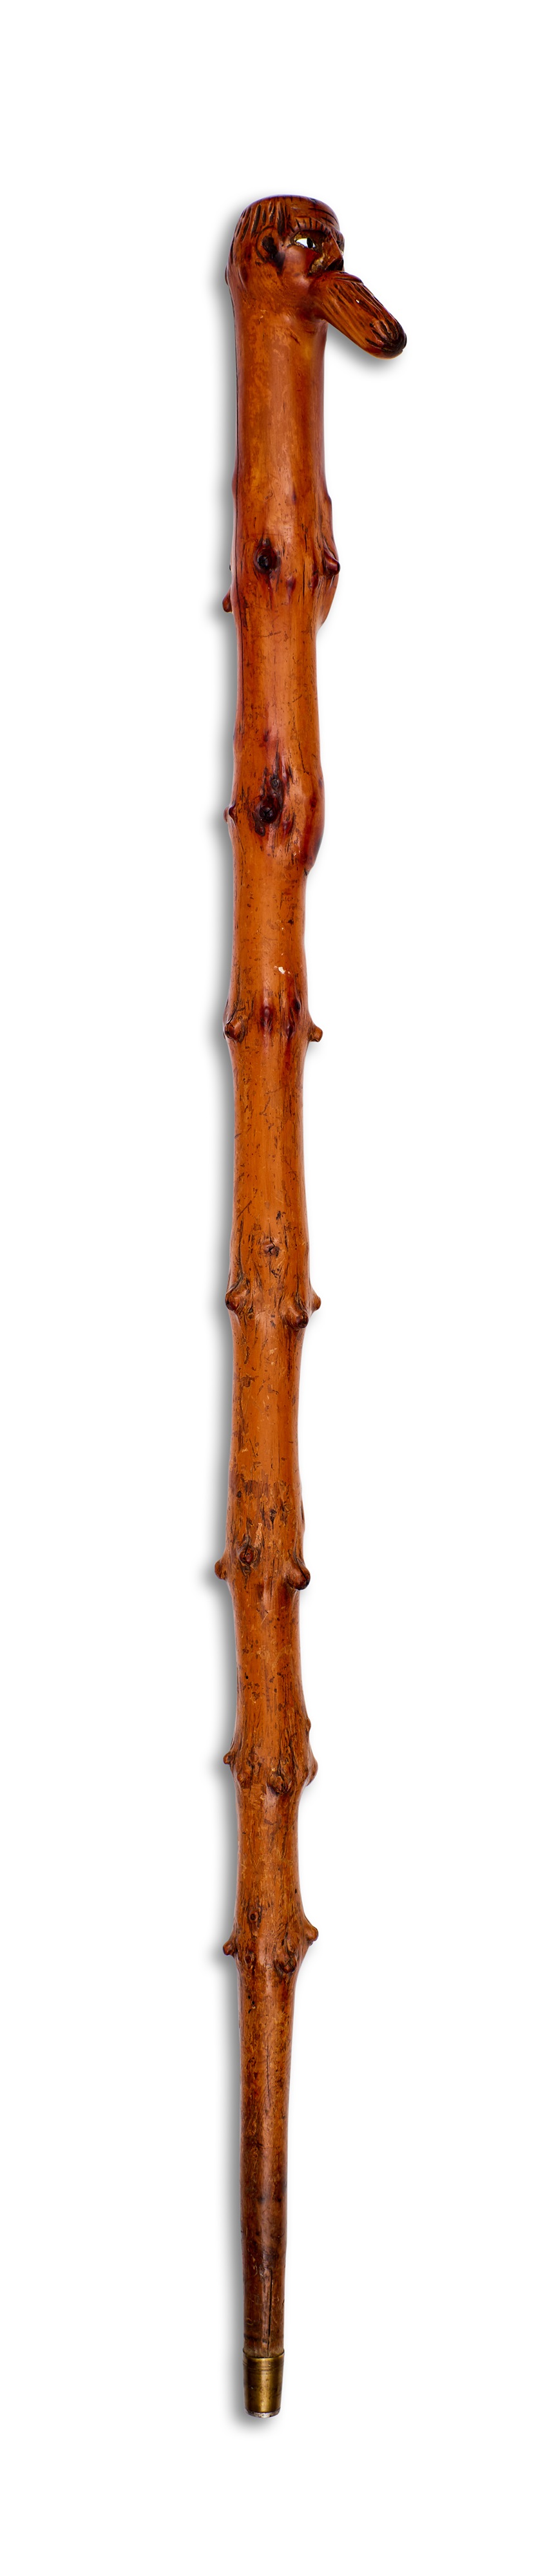 A RARE 19TH CENTURY CARVED ROOT WOOD SWORD STICK / CLUB, POSSIBLY MAORI TRIBE - Image 4 of 6